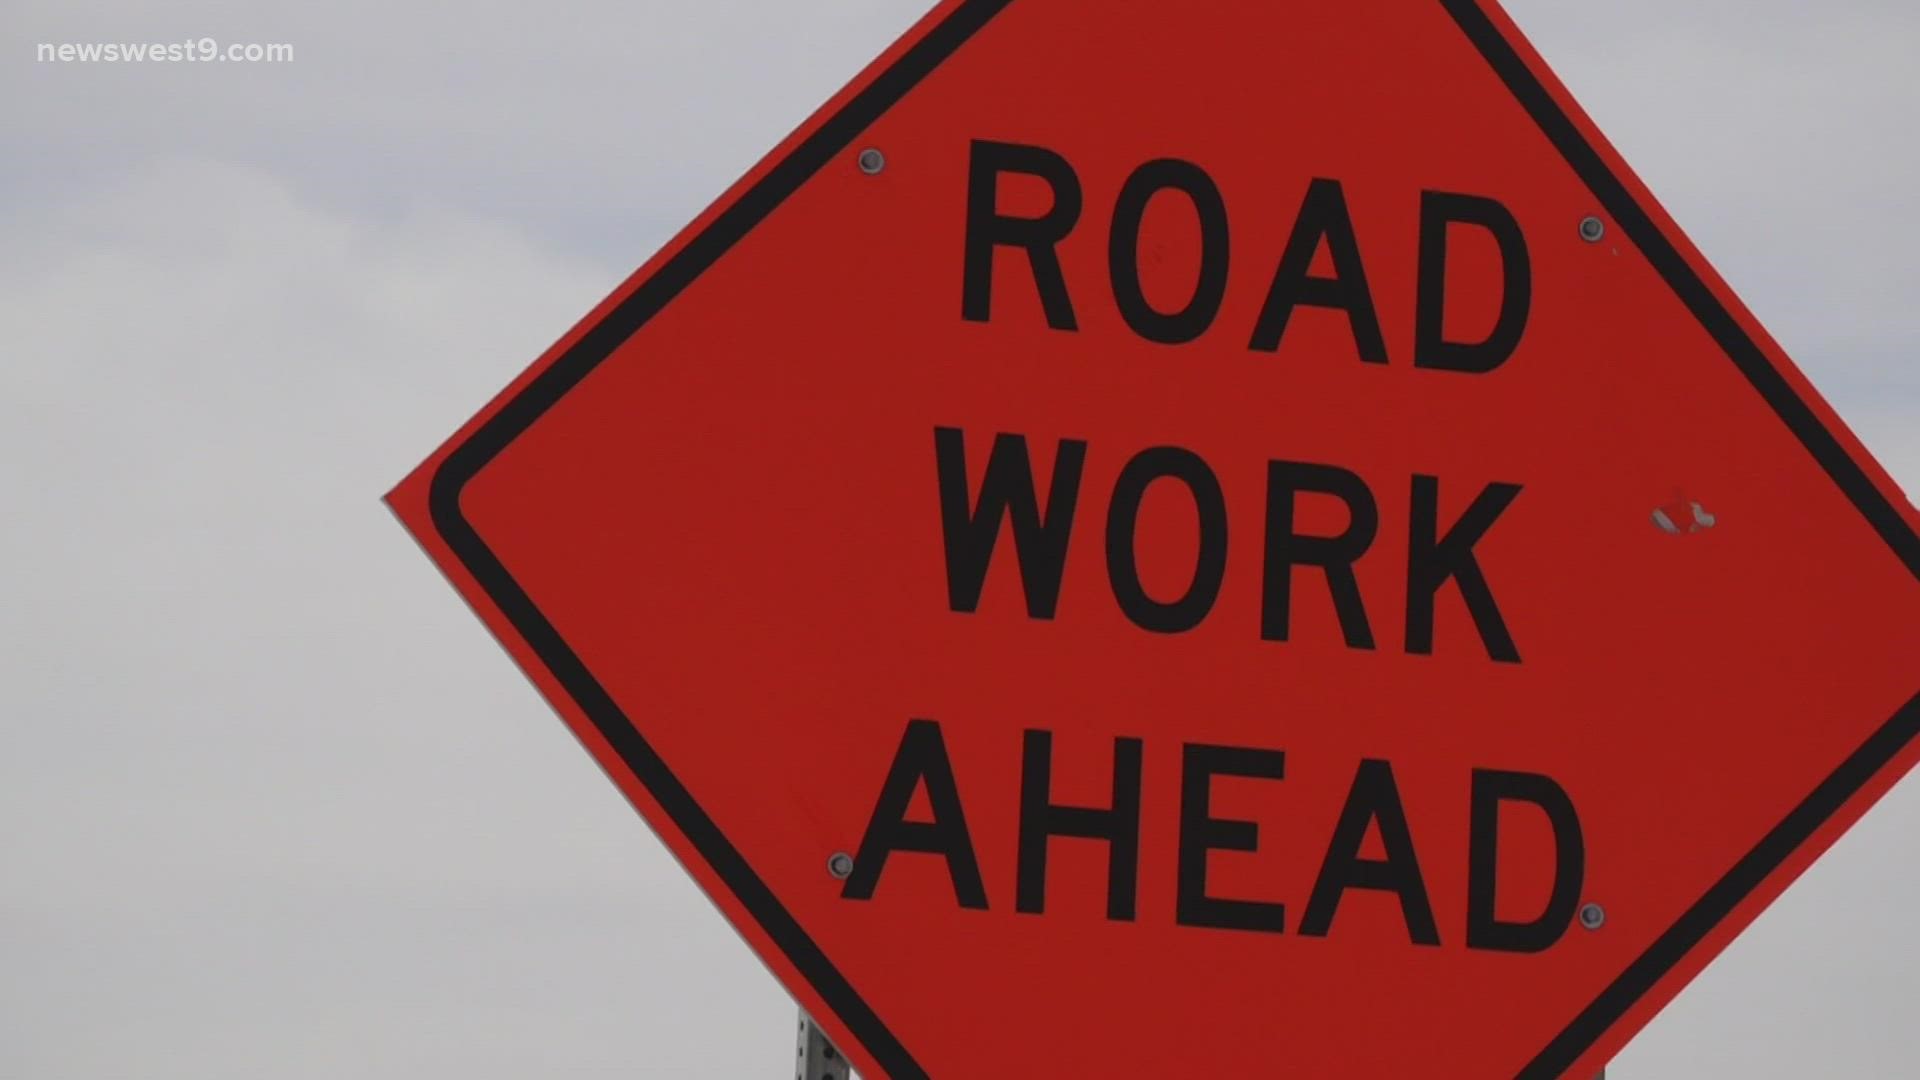 Starting on Tuesday, construction will severely limit access to East Yukon Road as the overpass project on East Loop 338 at East Yukon Road takes the next steps.